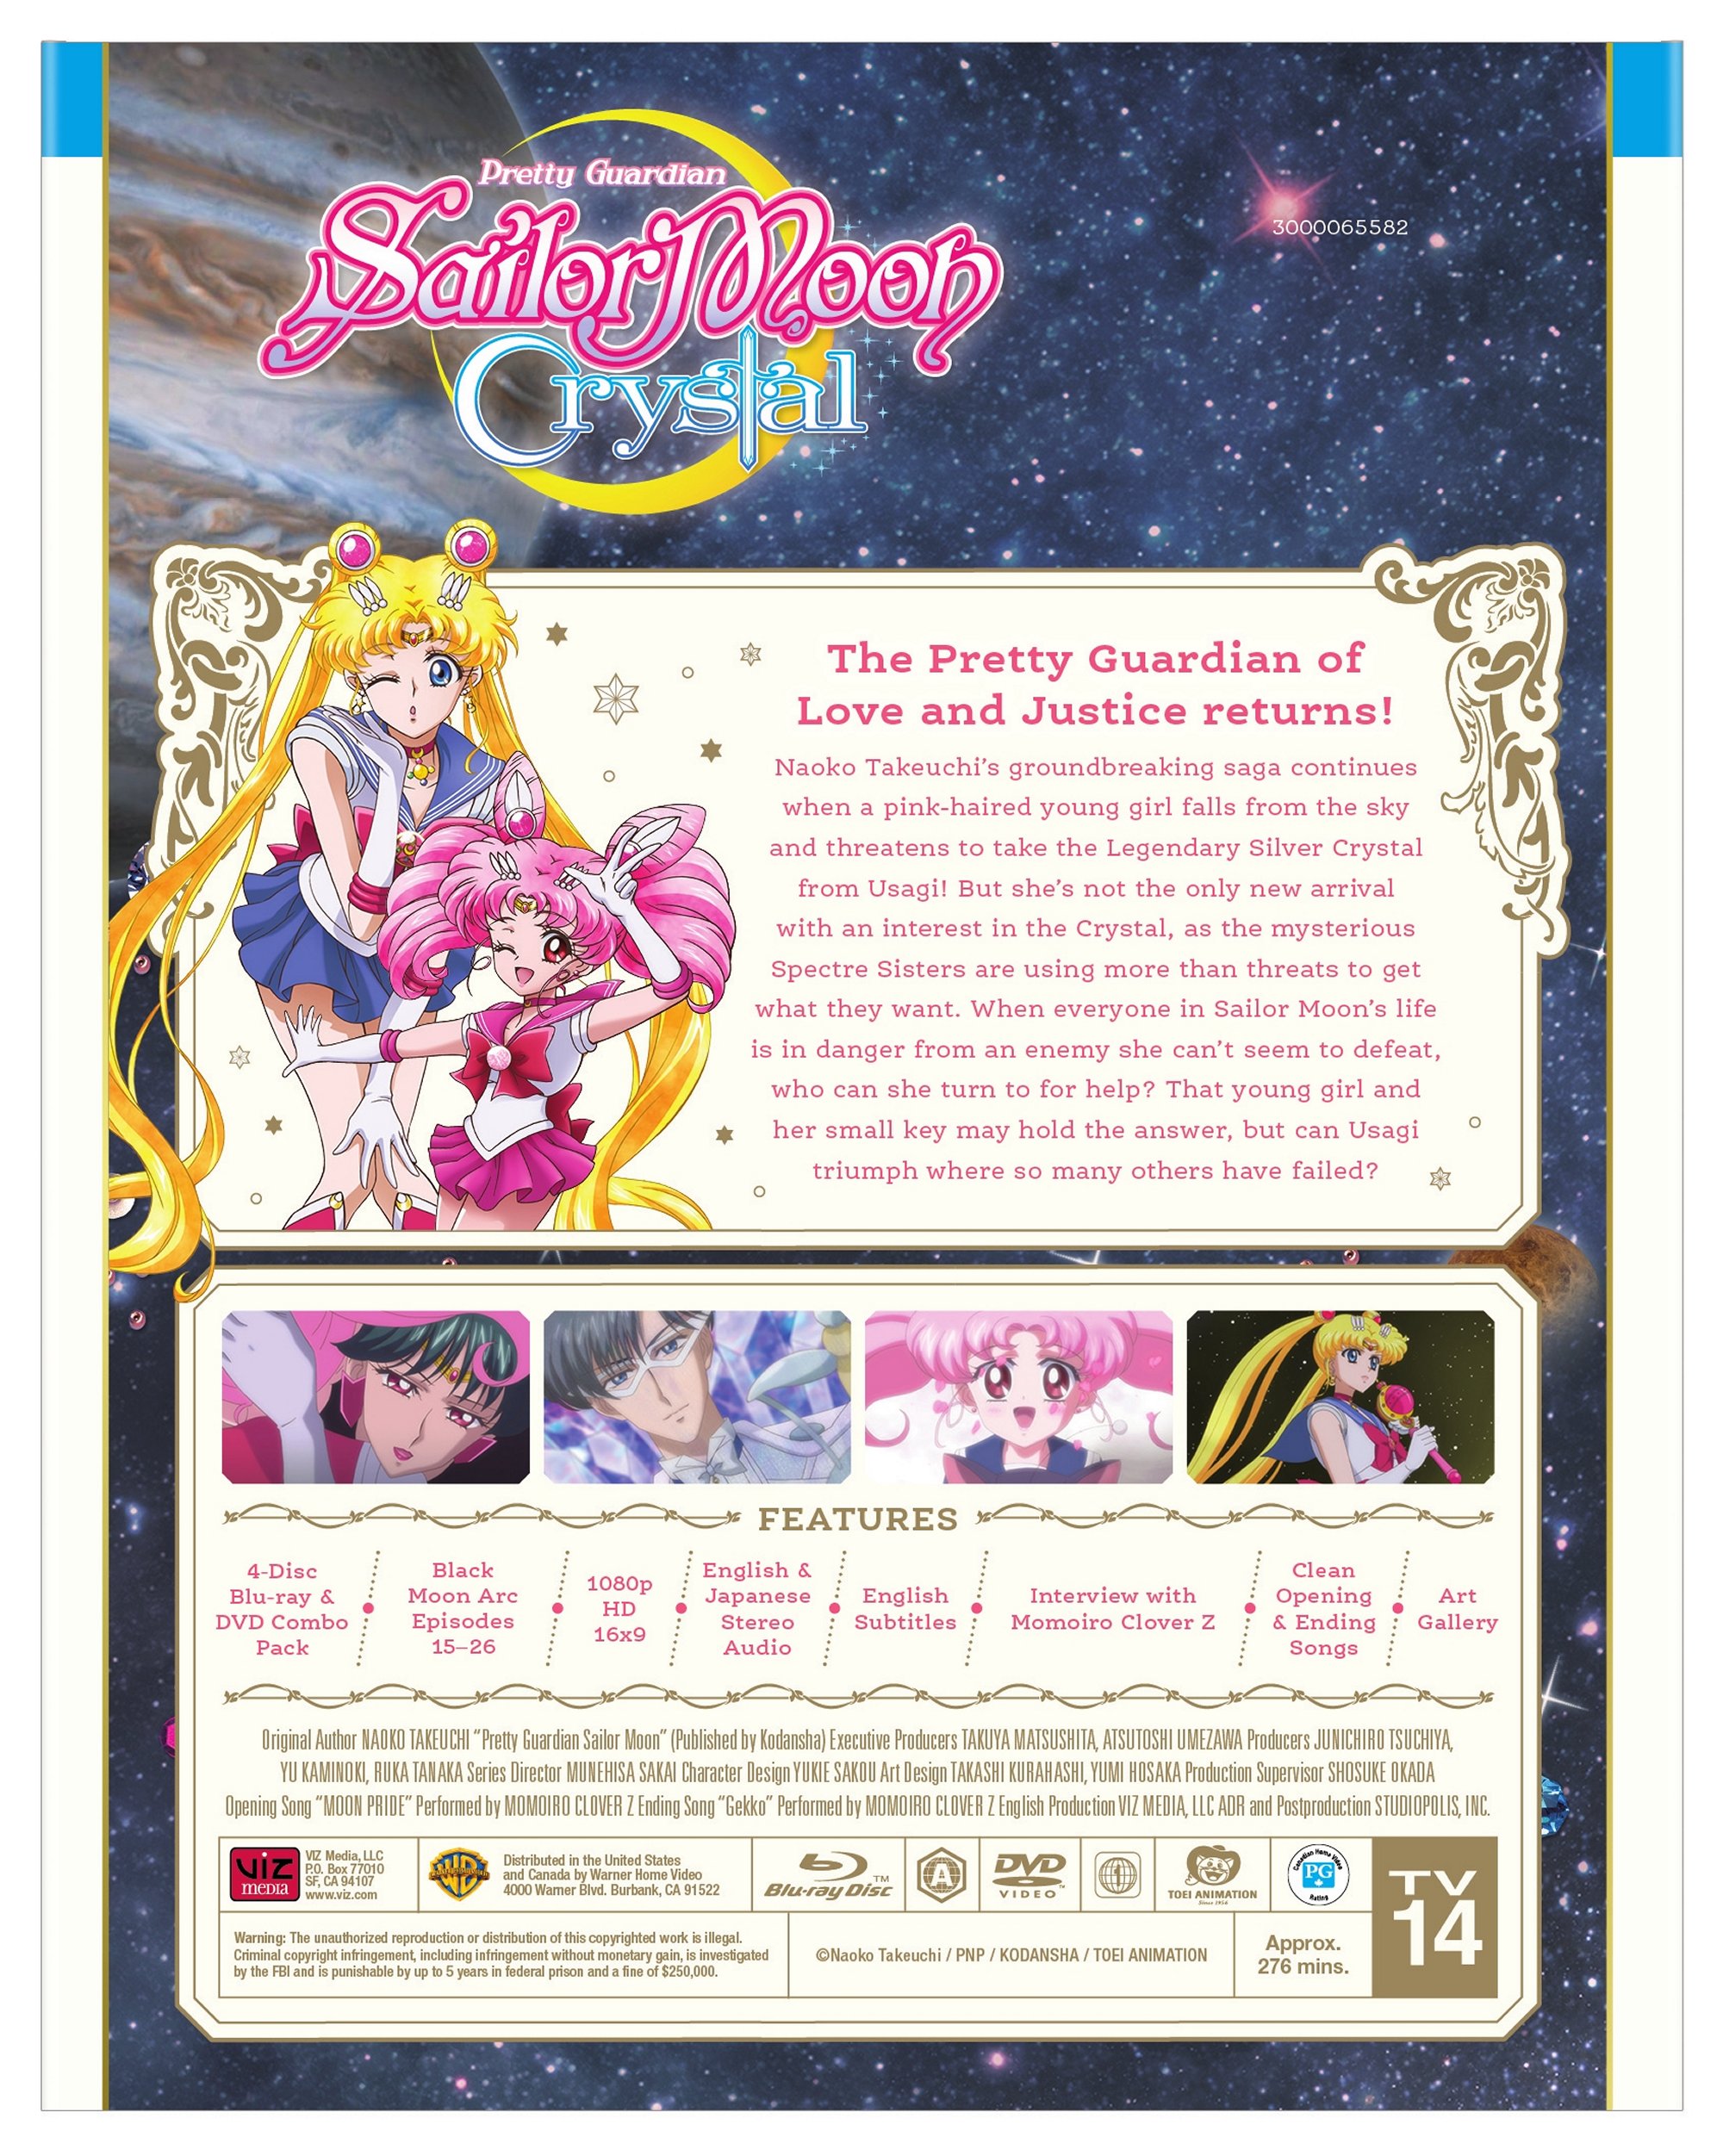 Sailor Moon Crystal Set 2 Limited Edition Blu-ray/DVD image count 3